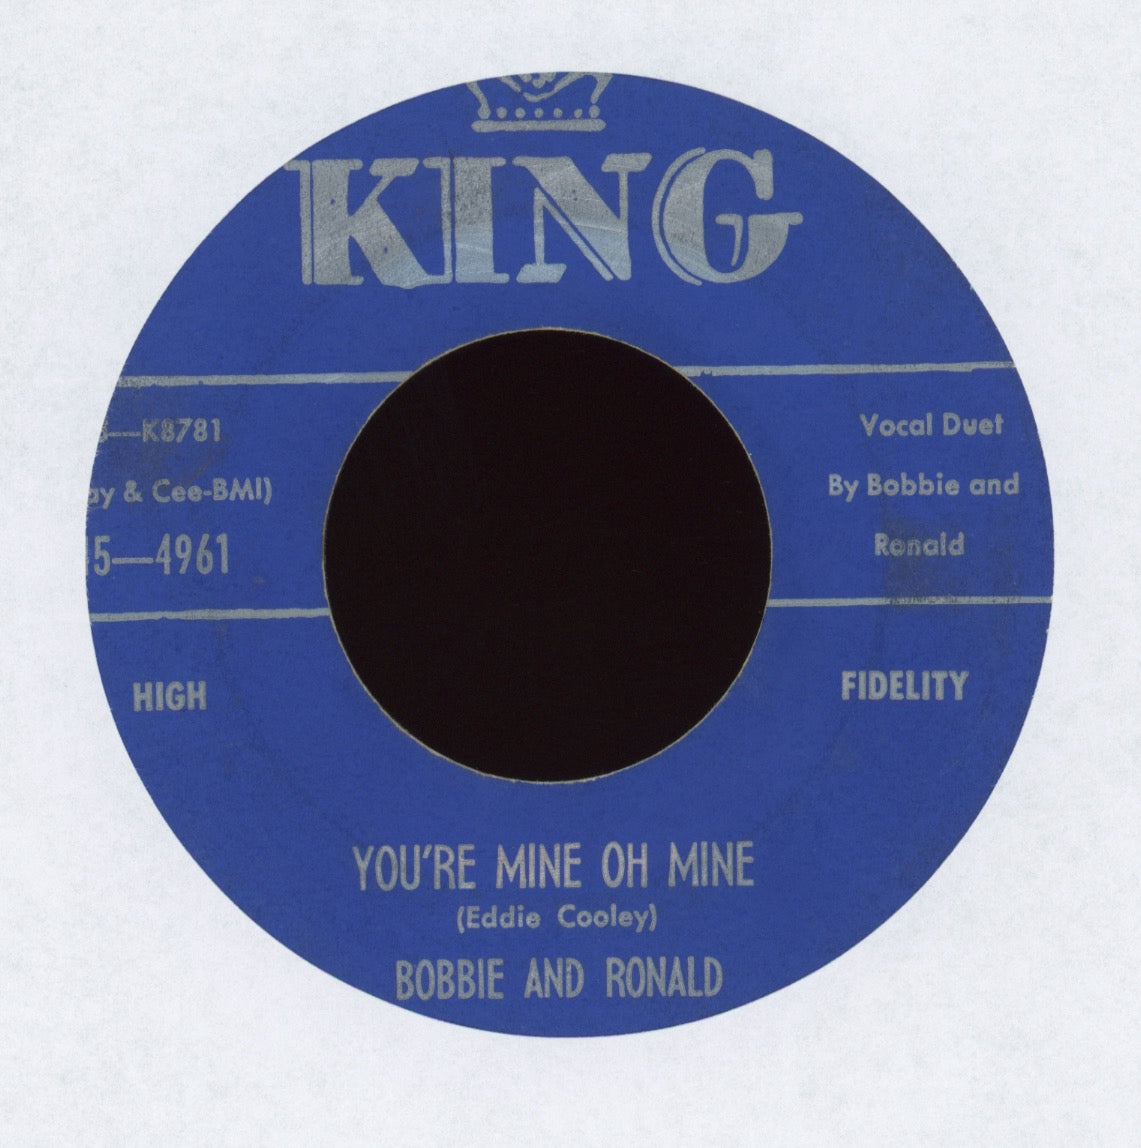 Bobby And Ronald - You're Mine Oh Mine on King